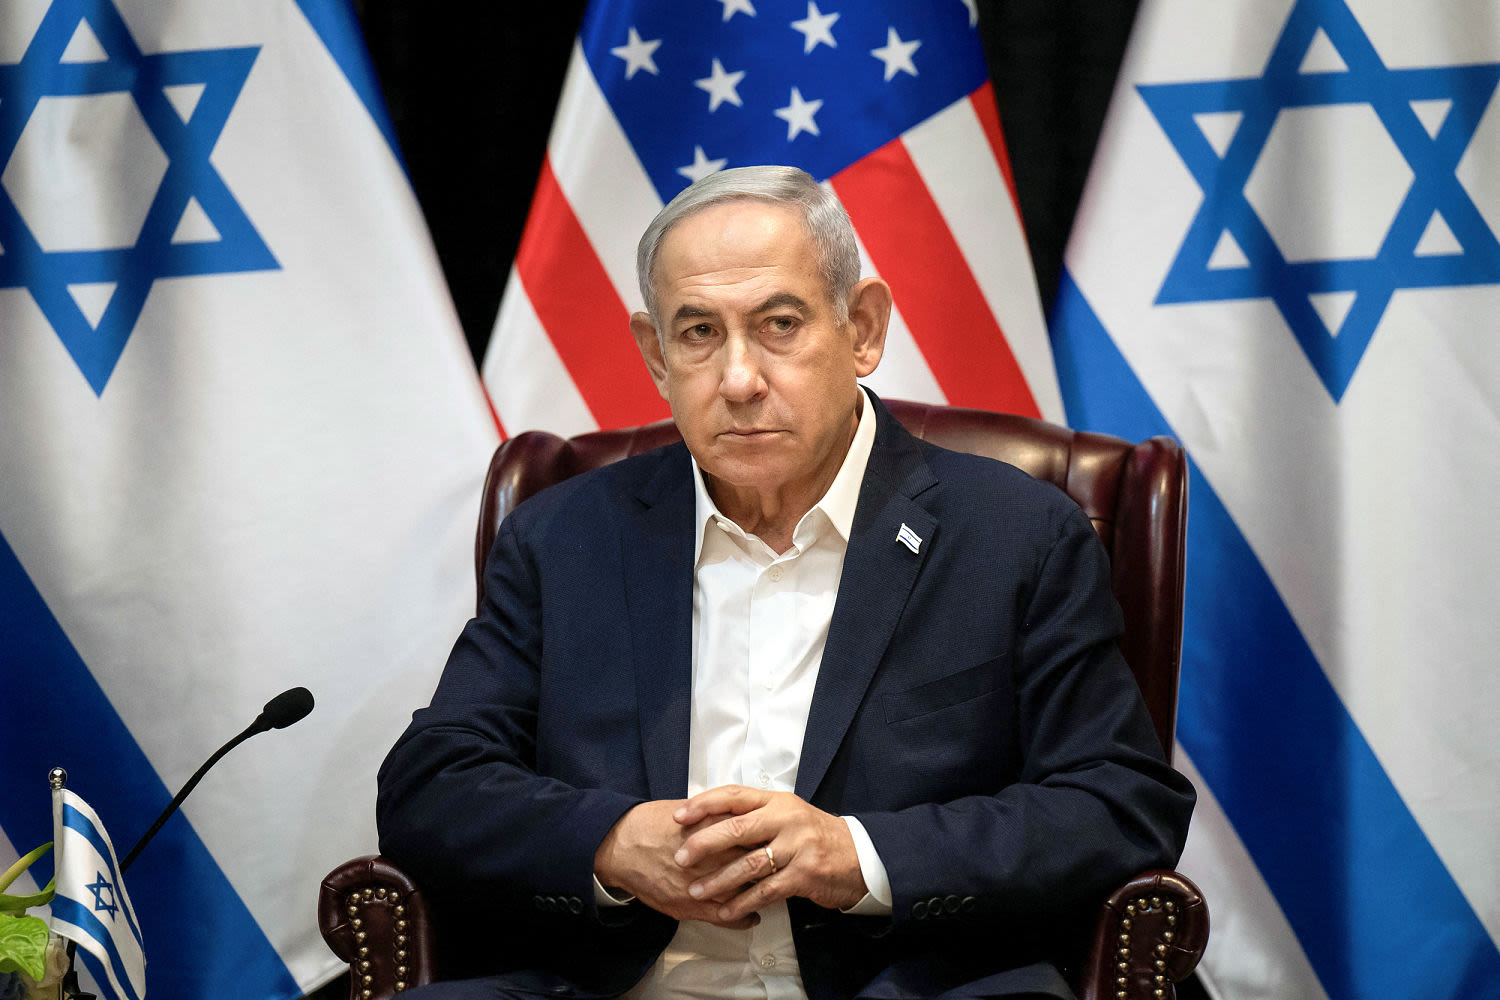 U.S. House votes to sanction international court over warrants for Netanyahu and other Israeli officials